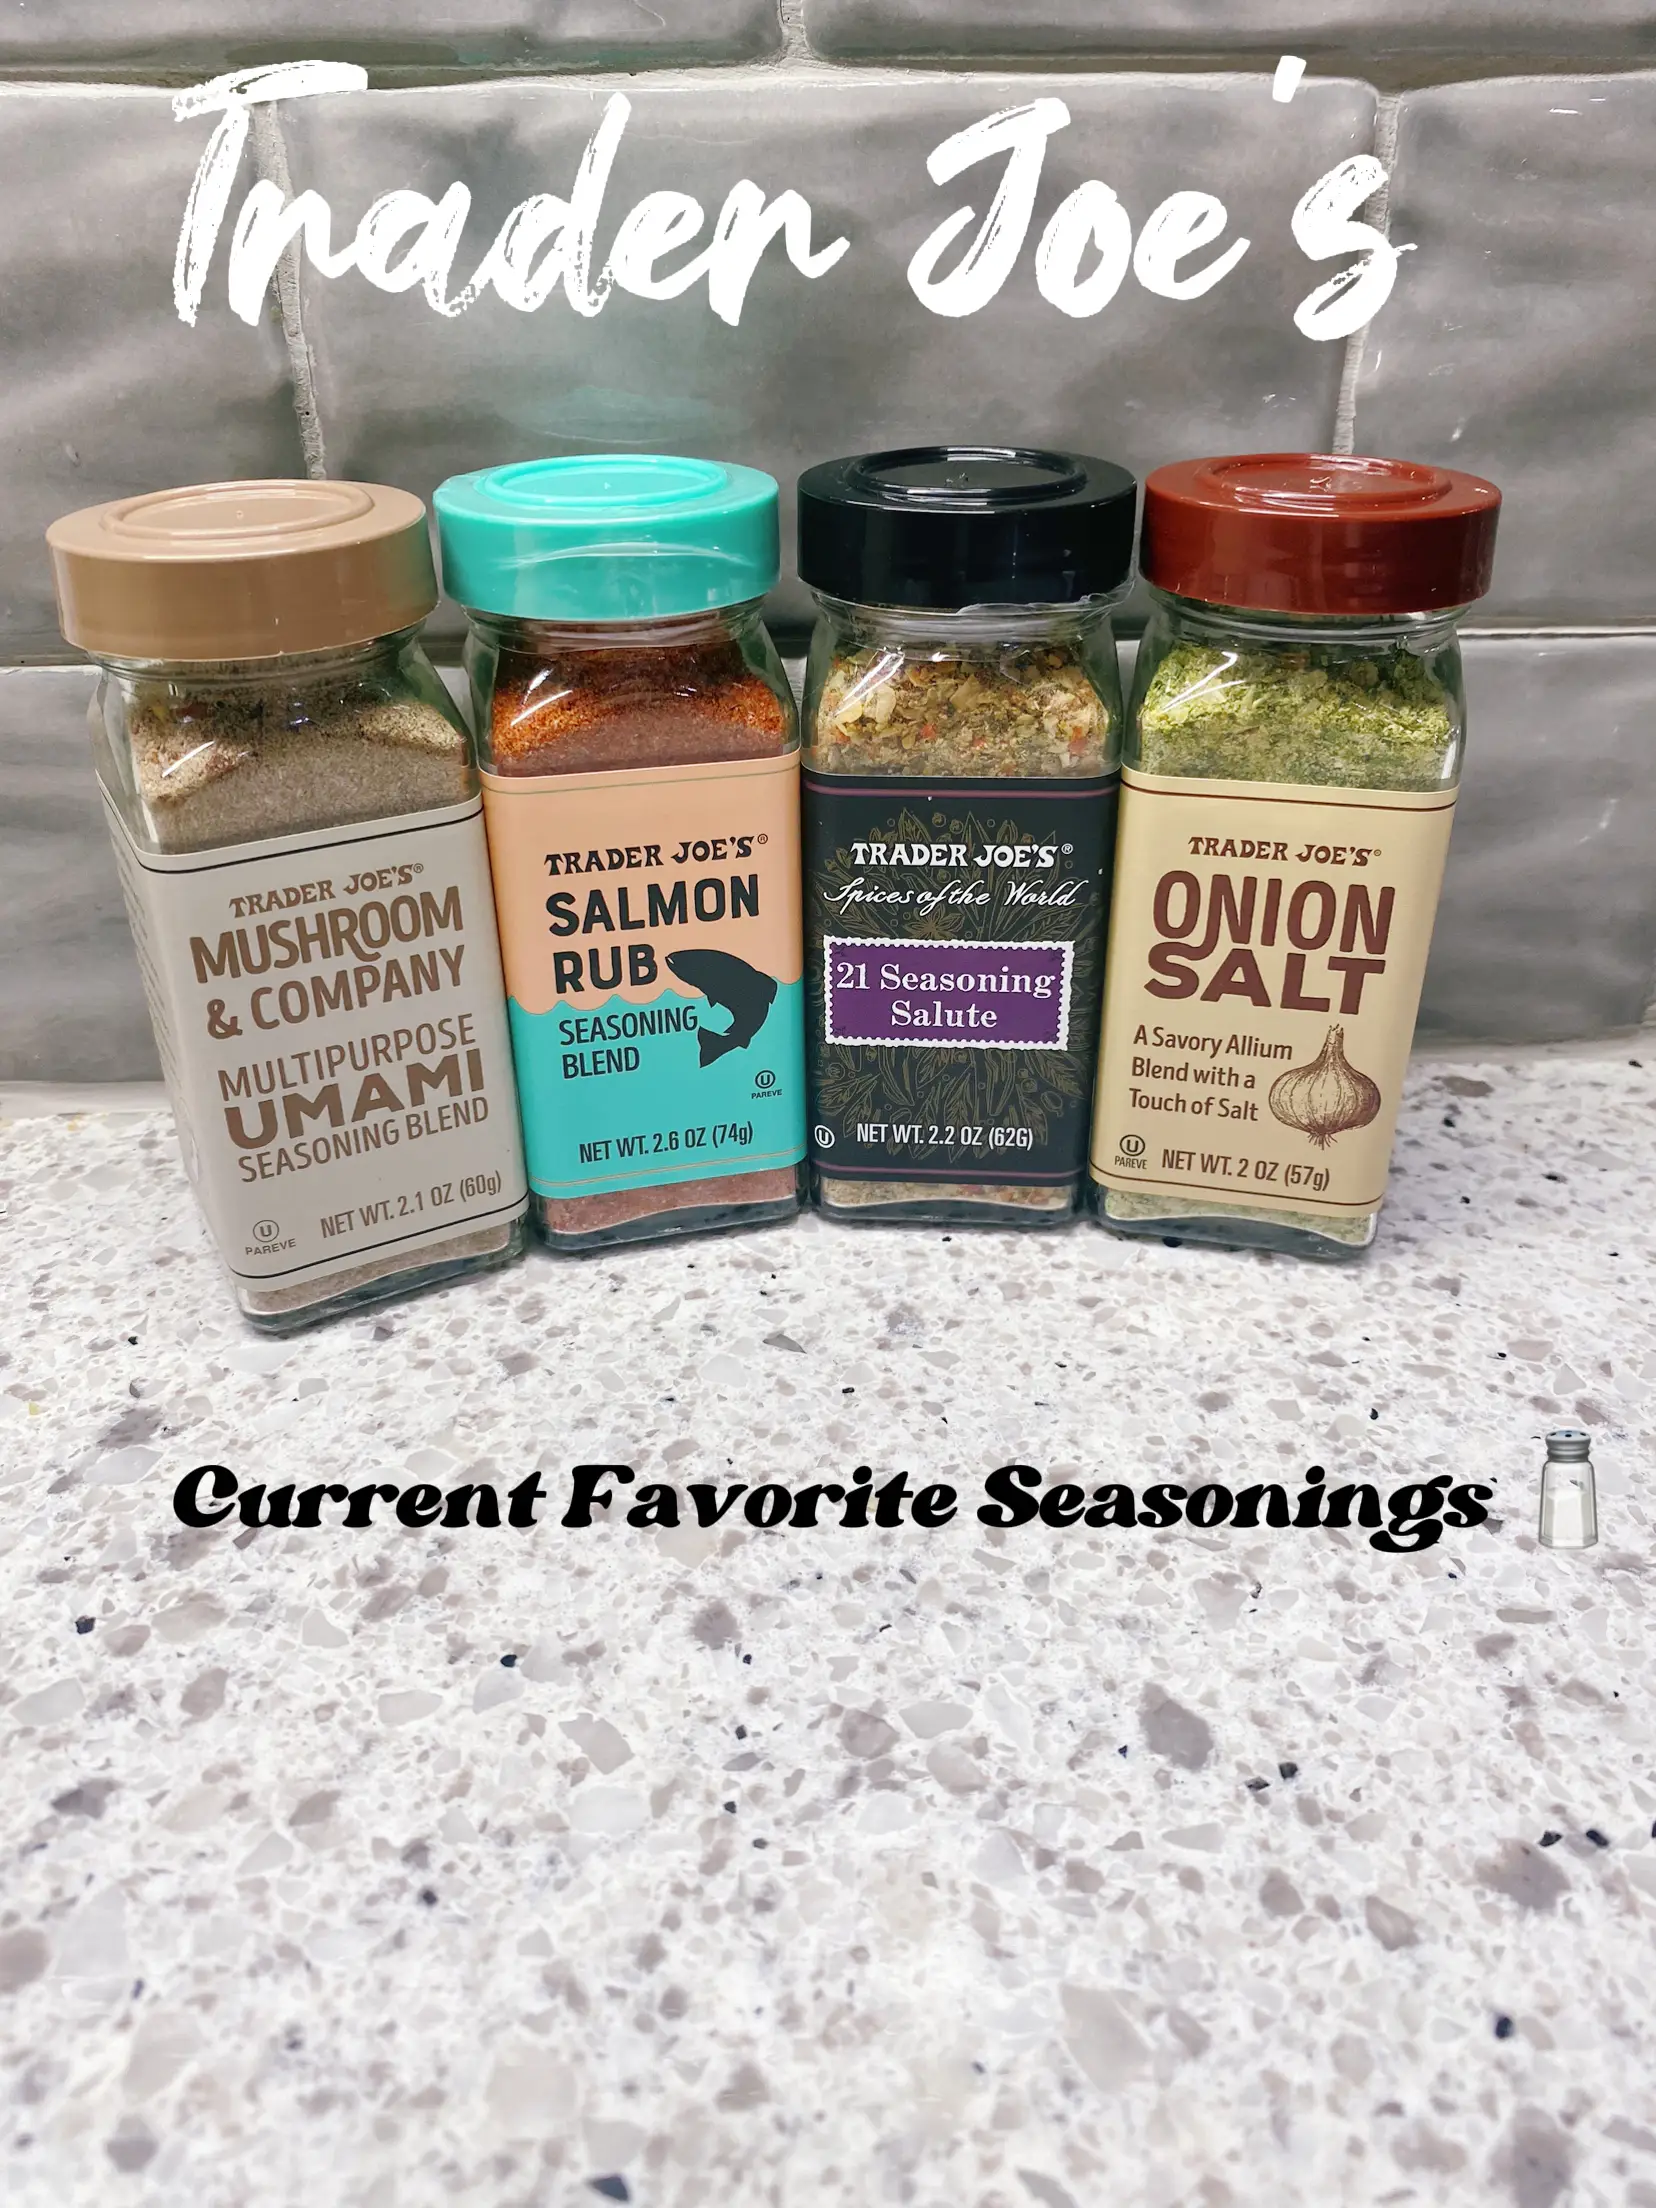 Trader Joe's: New Seasonings 🧂, Gallery posted by The Soft Nurse